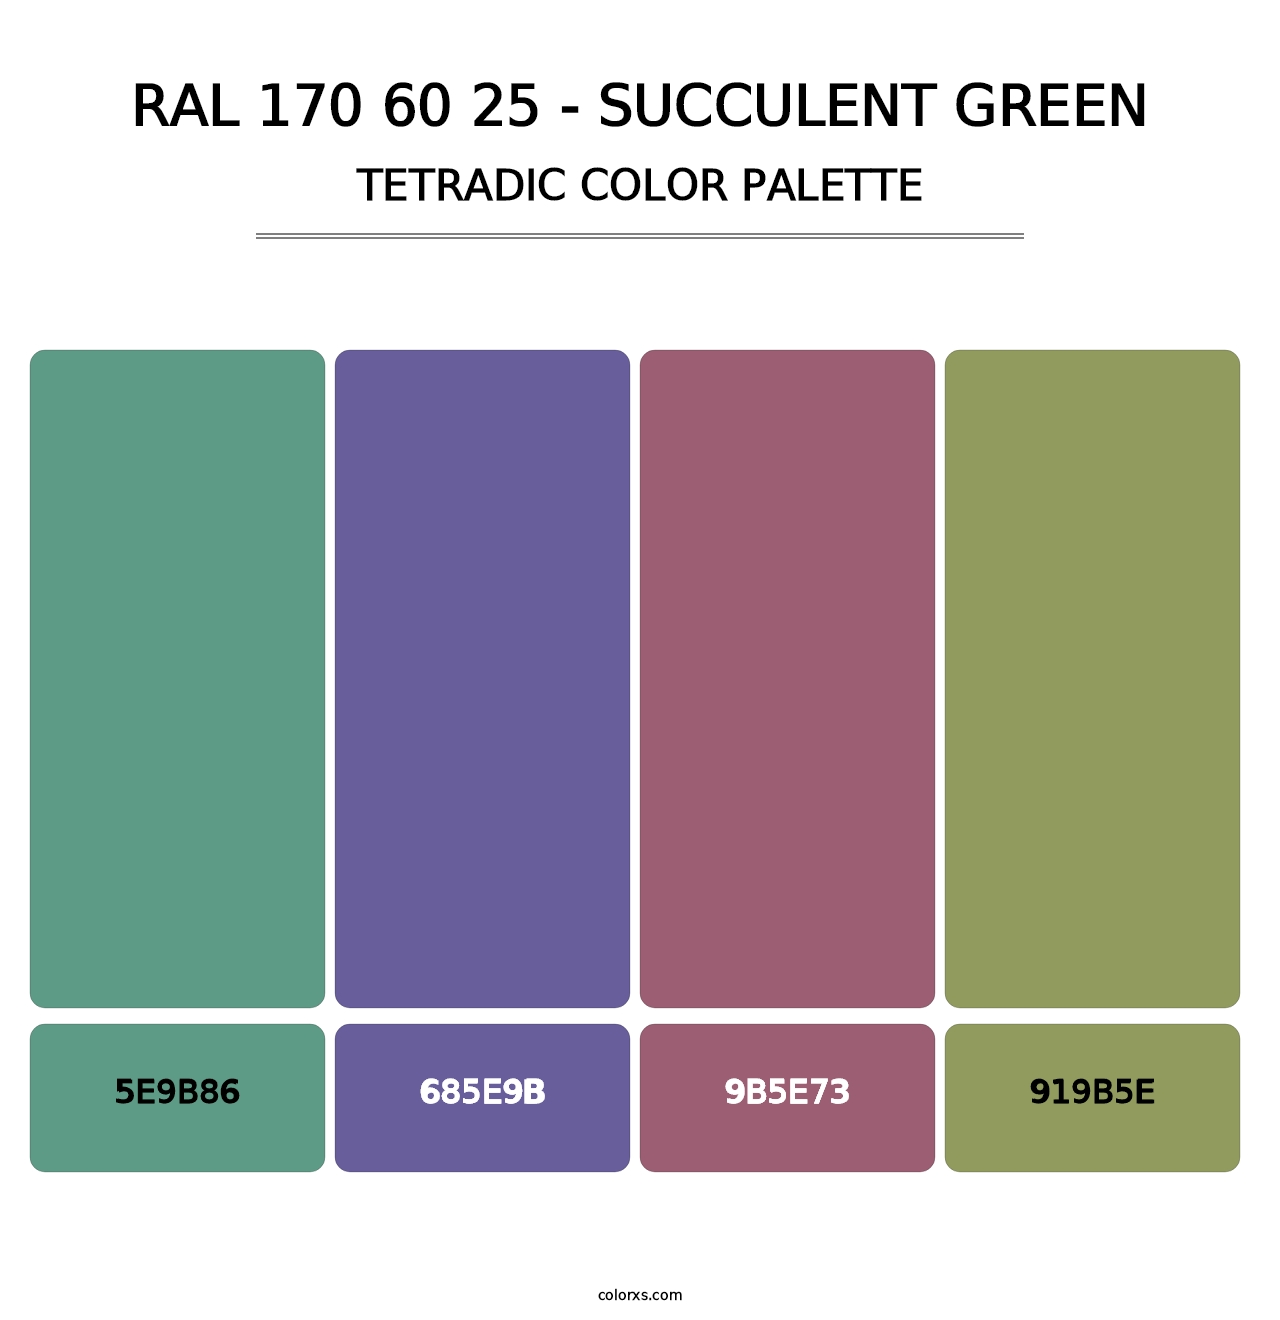 RAL 170 60 25 - Succulent Green - Tetradic Color Palette